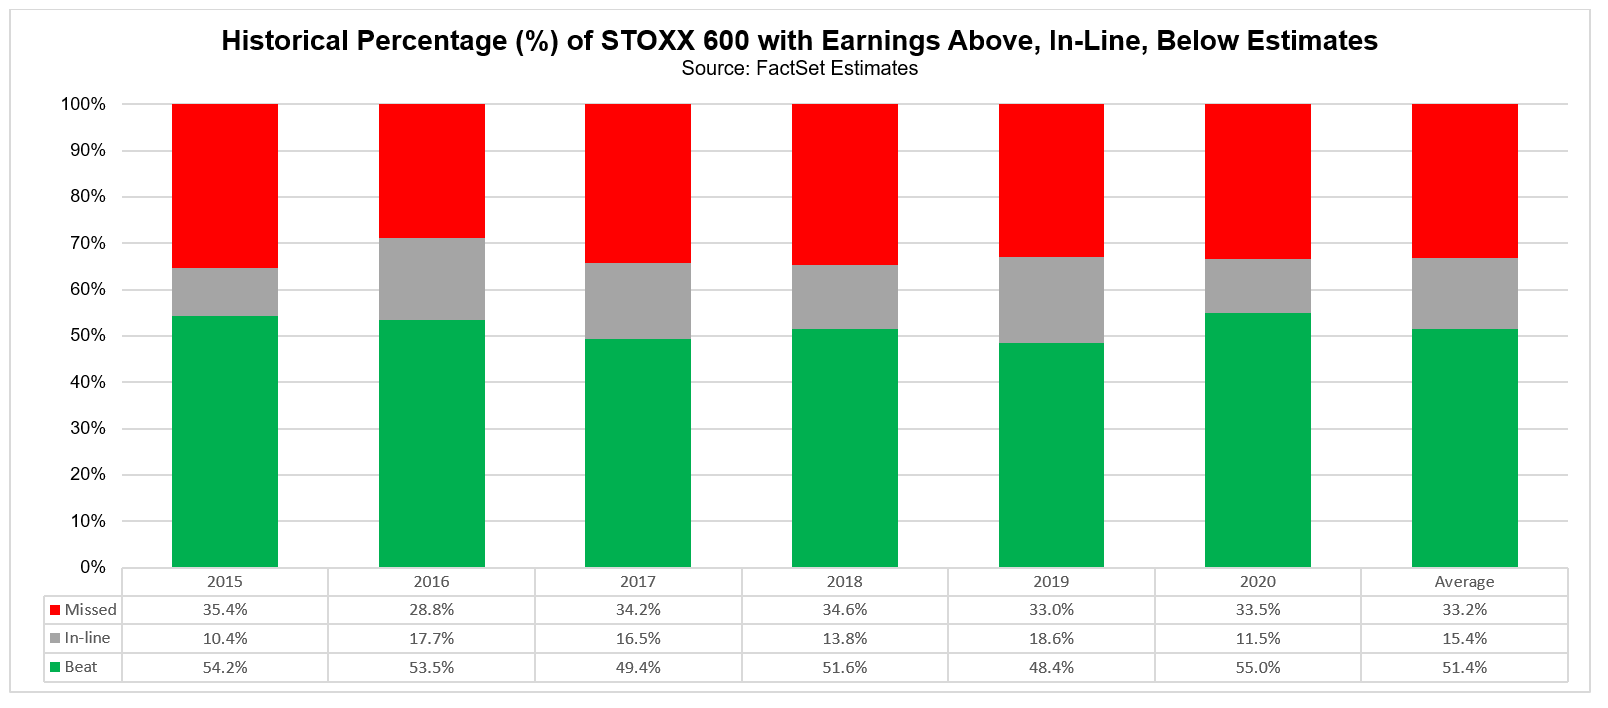 Historical percentage of STOXX 600 cos with earnings above inline below estimates